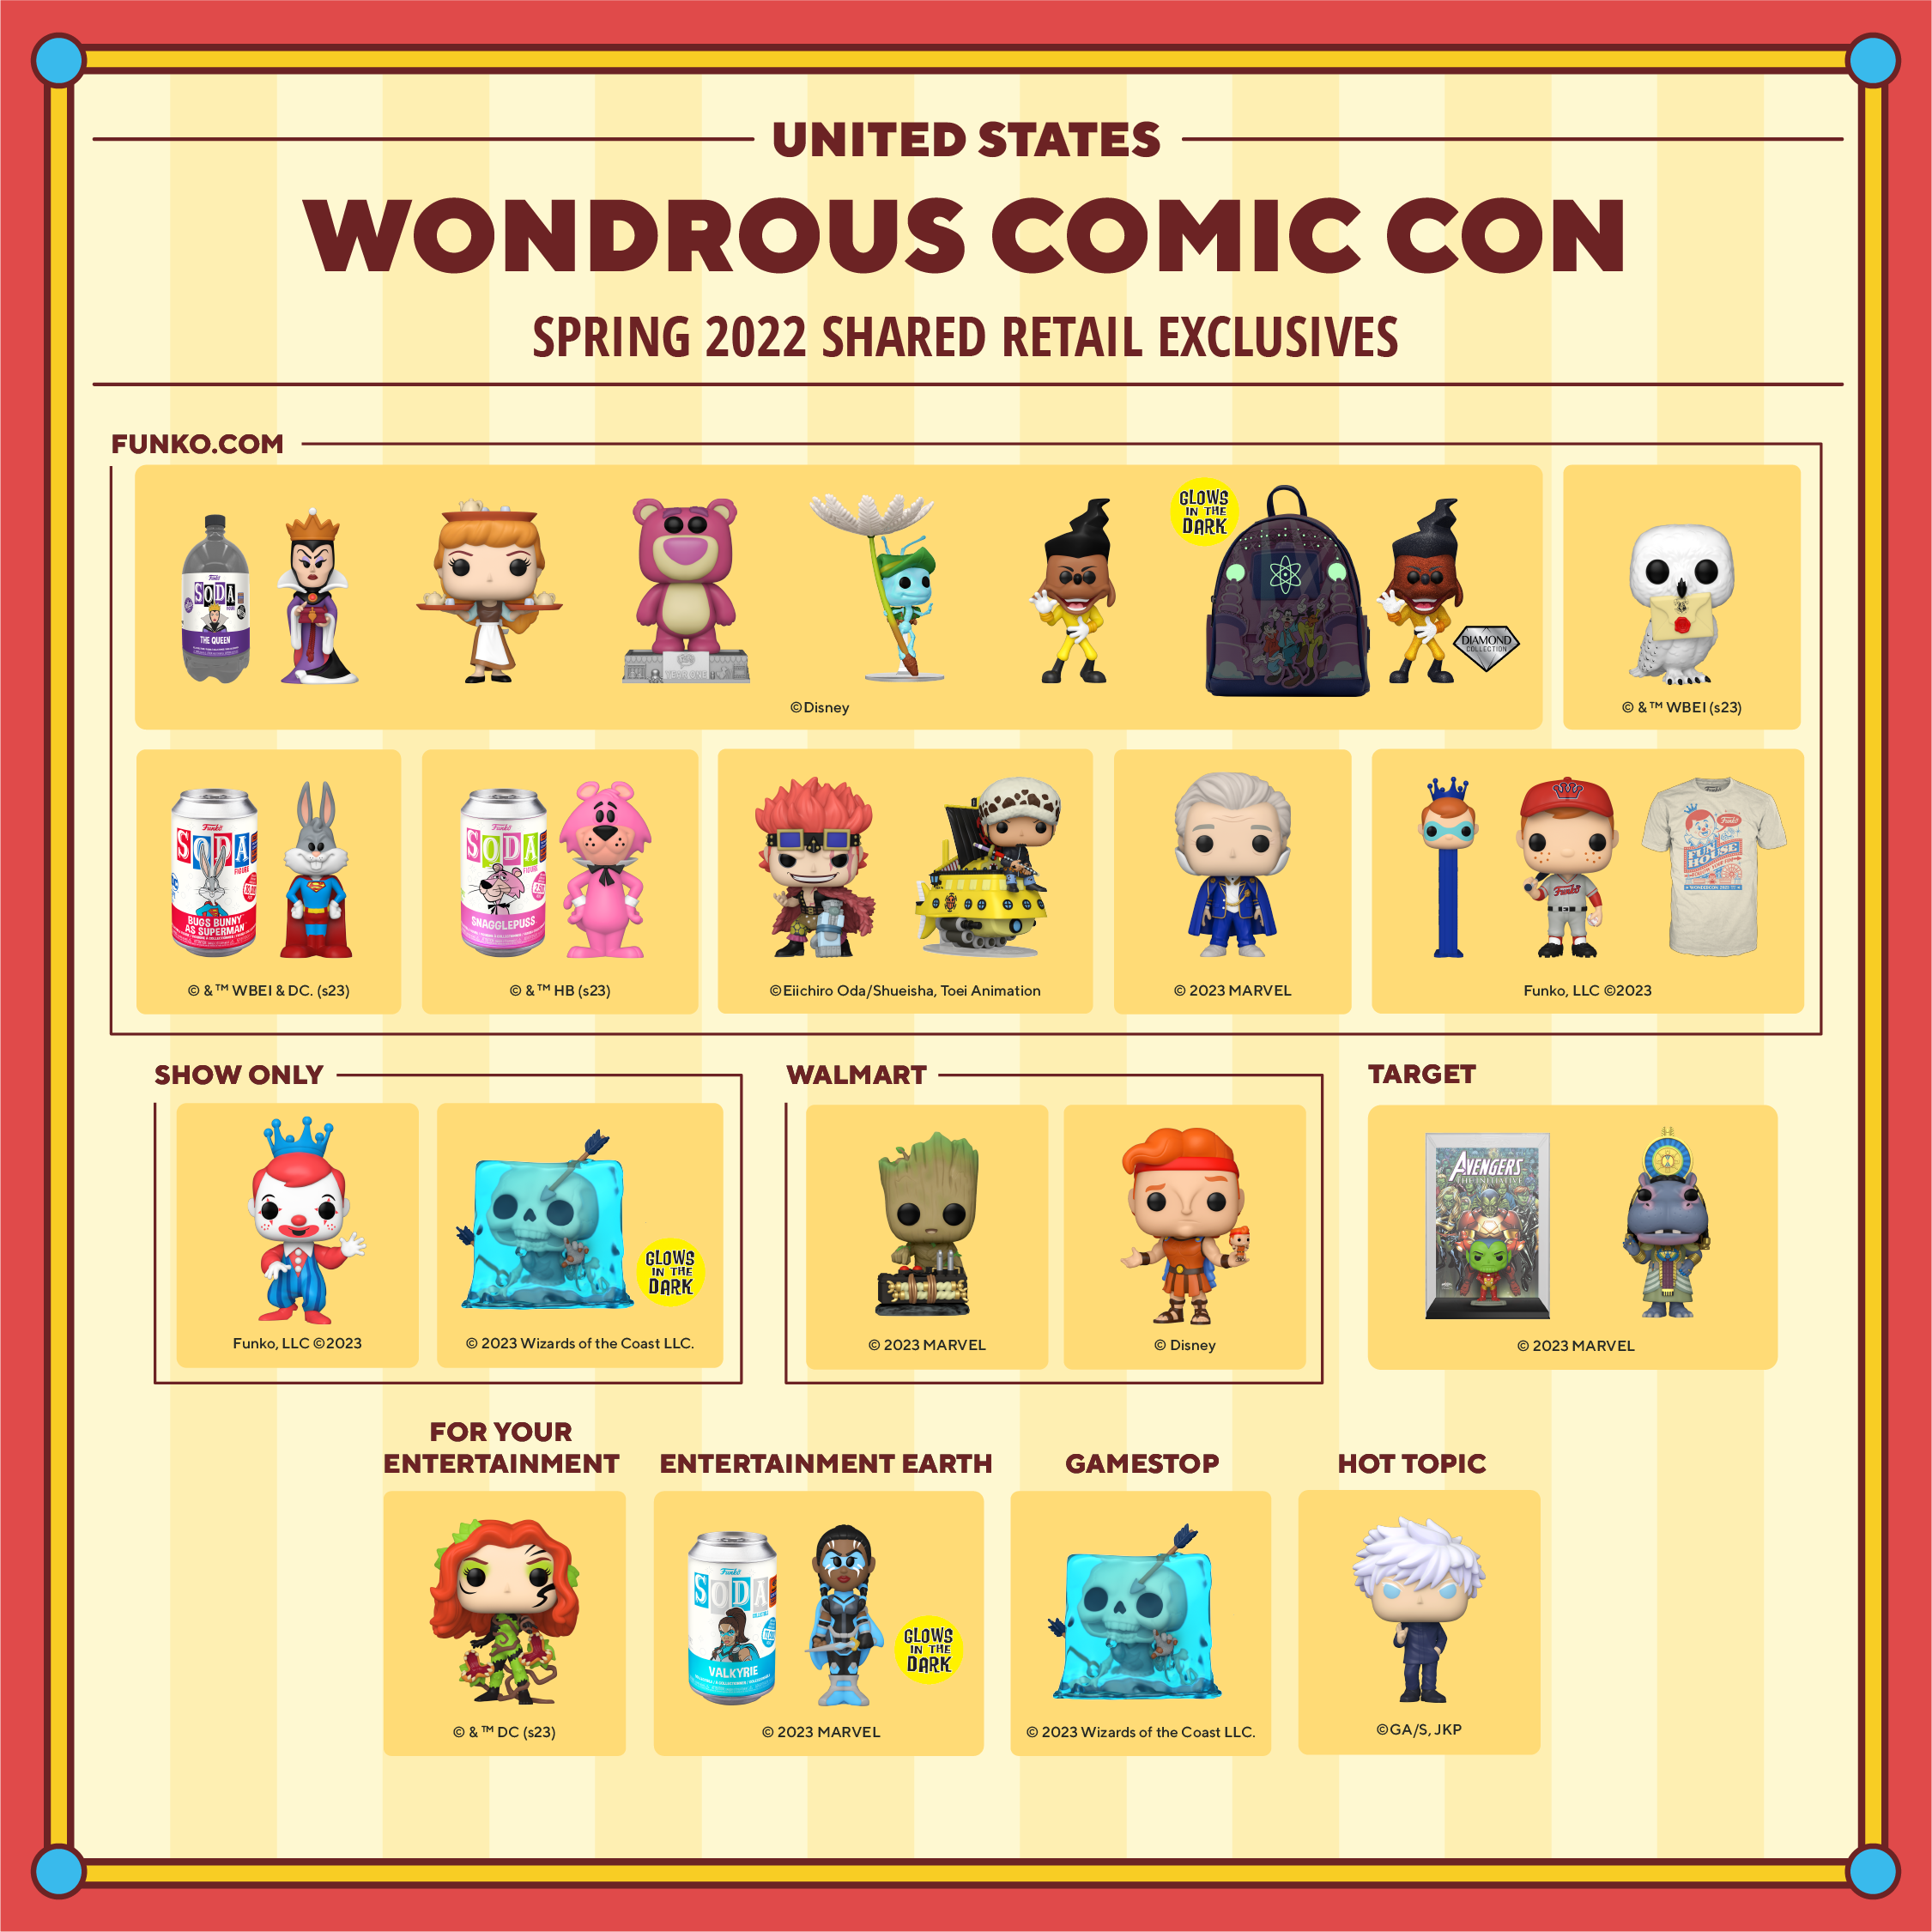 2023 WonderCon United States Spring 2023 shared retail exclusives. Collectibles coming to Funko.com: Funko SODA 3-Liter of the Evil Queen, Pop! Cinderella with Trays, Pop! Classics Lotso Bear, Pop! Flik on Dandelion Seed, Pop! Powerline, Powerline Pop! and Bag bundle, Pop! Hedwig, Funko SODA Buggs Bunny, Funko SODA Snagglepuss, Pop! Eustass Kid, Pop! Trafalgar Law on Polar Tang, Pop! Lord Krytar, Pop! Pez Freddy Funko in Mask, Pop! Freddy Funko in Baseball Uniform, WonderCon 2020 fan tee shirt. Convention-only exclusives include: Pop! Freddy in Clown Costume and glow-in-the-dark Pop! Gelatinous Cube. Walmart exclusives include: Pop! Baby Groot with Detonator and Pop! Hercules with Action Figure. Target exclusives include: Pop! Comic Cover Skrull as Iron Man and Pop! Taweret. For Your Entertainment exclusive includes: Pop! Poison Ivy. Entertainment Earth exclusive includes: Funko SODA Valkyrie. GameStop exclusive includes: Pop! Gelatinous Cube. Hot Topic exclusive includes: Pop! Saturo Gojo.